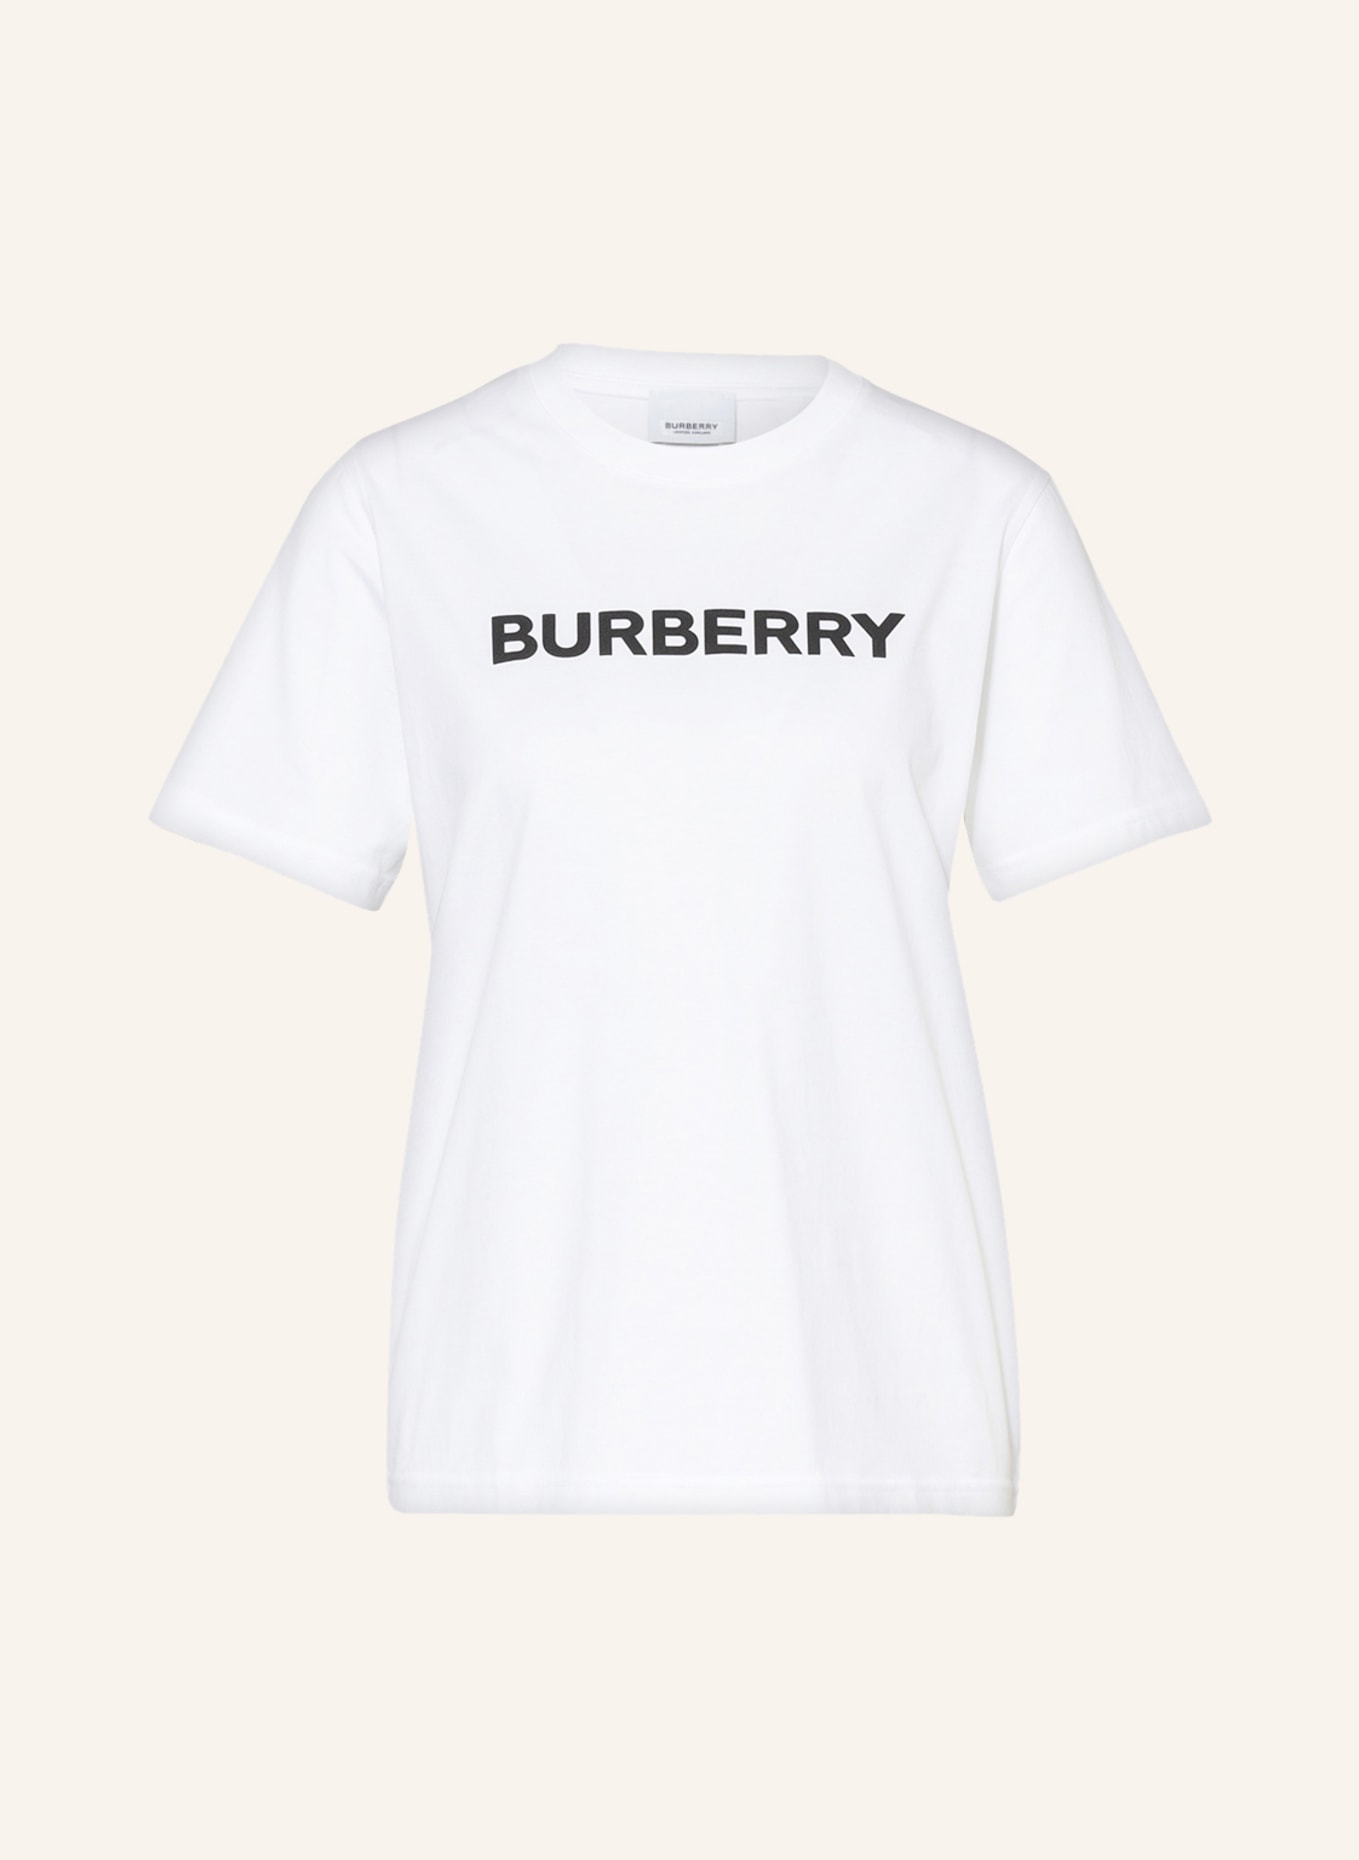 BURBERRY T-shirt MARGOT , Color: WHITE (Image 1)